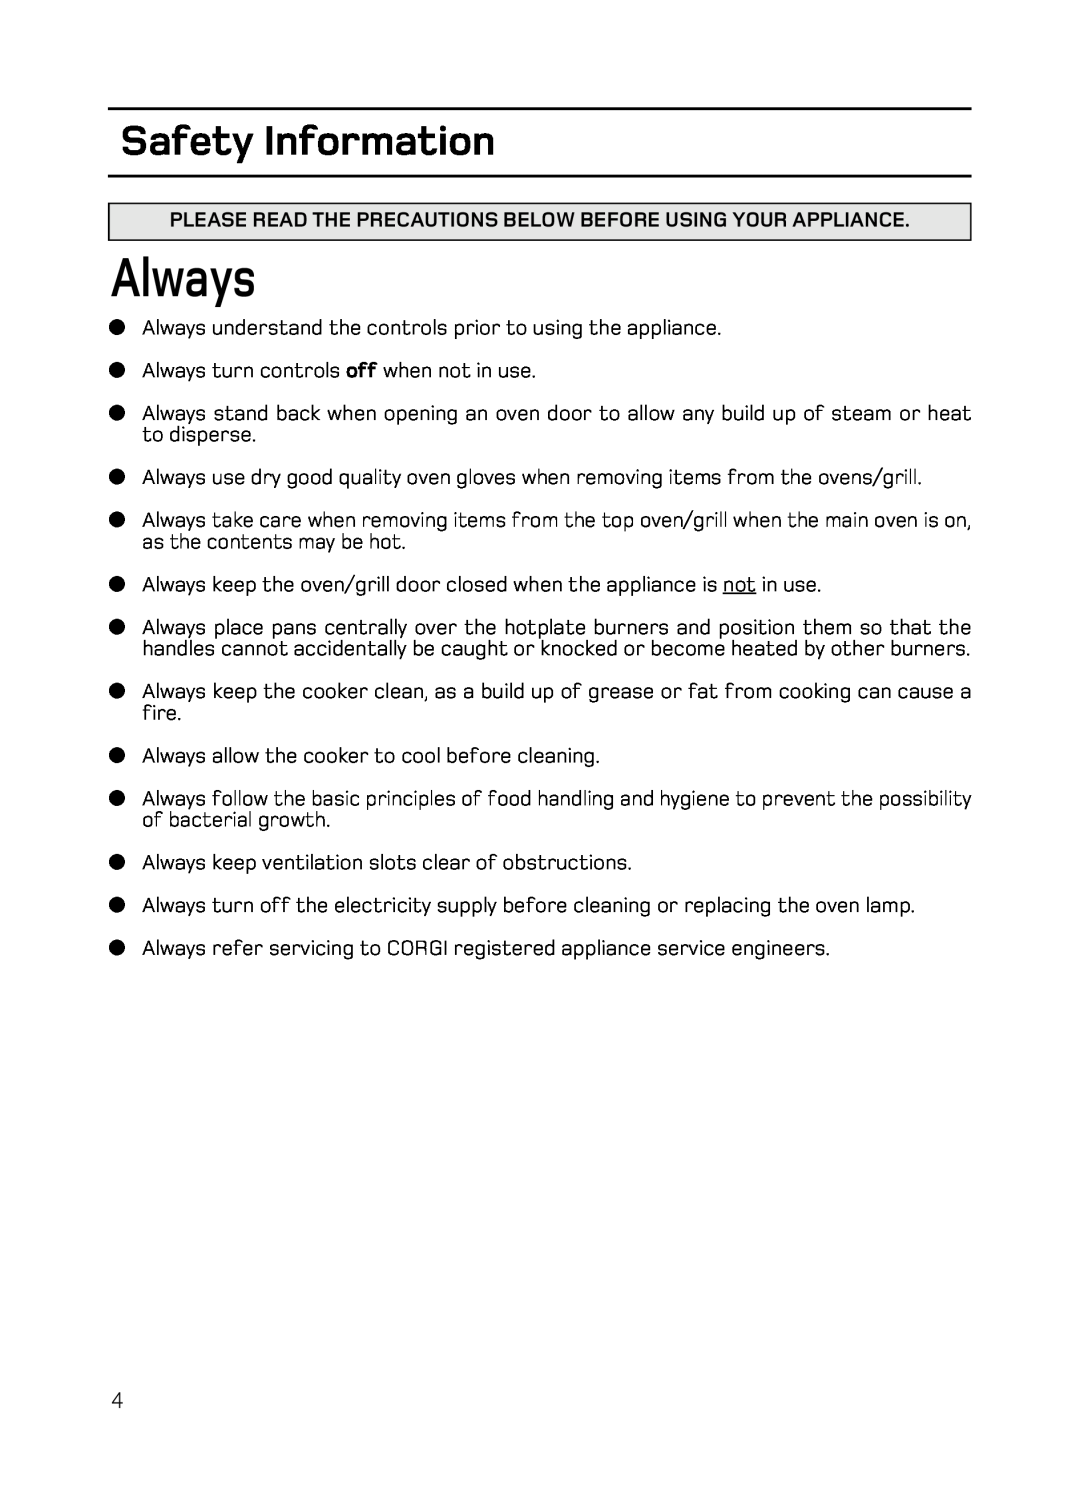 Hotpoint EG94 manual Always, Safety Information, Please Read The Precautions Below Before Using Your Appliance 